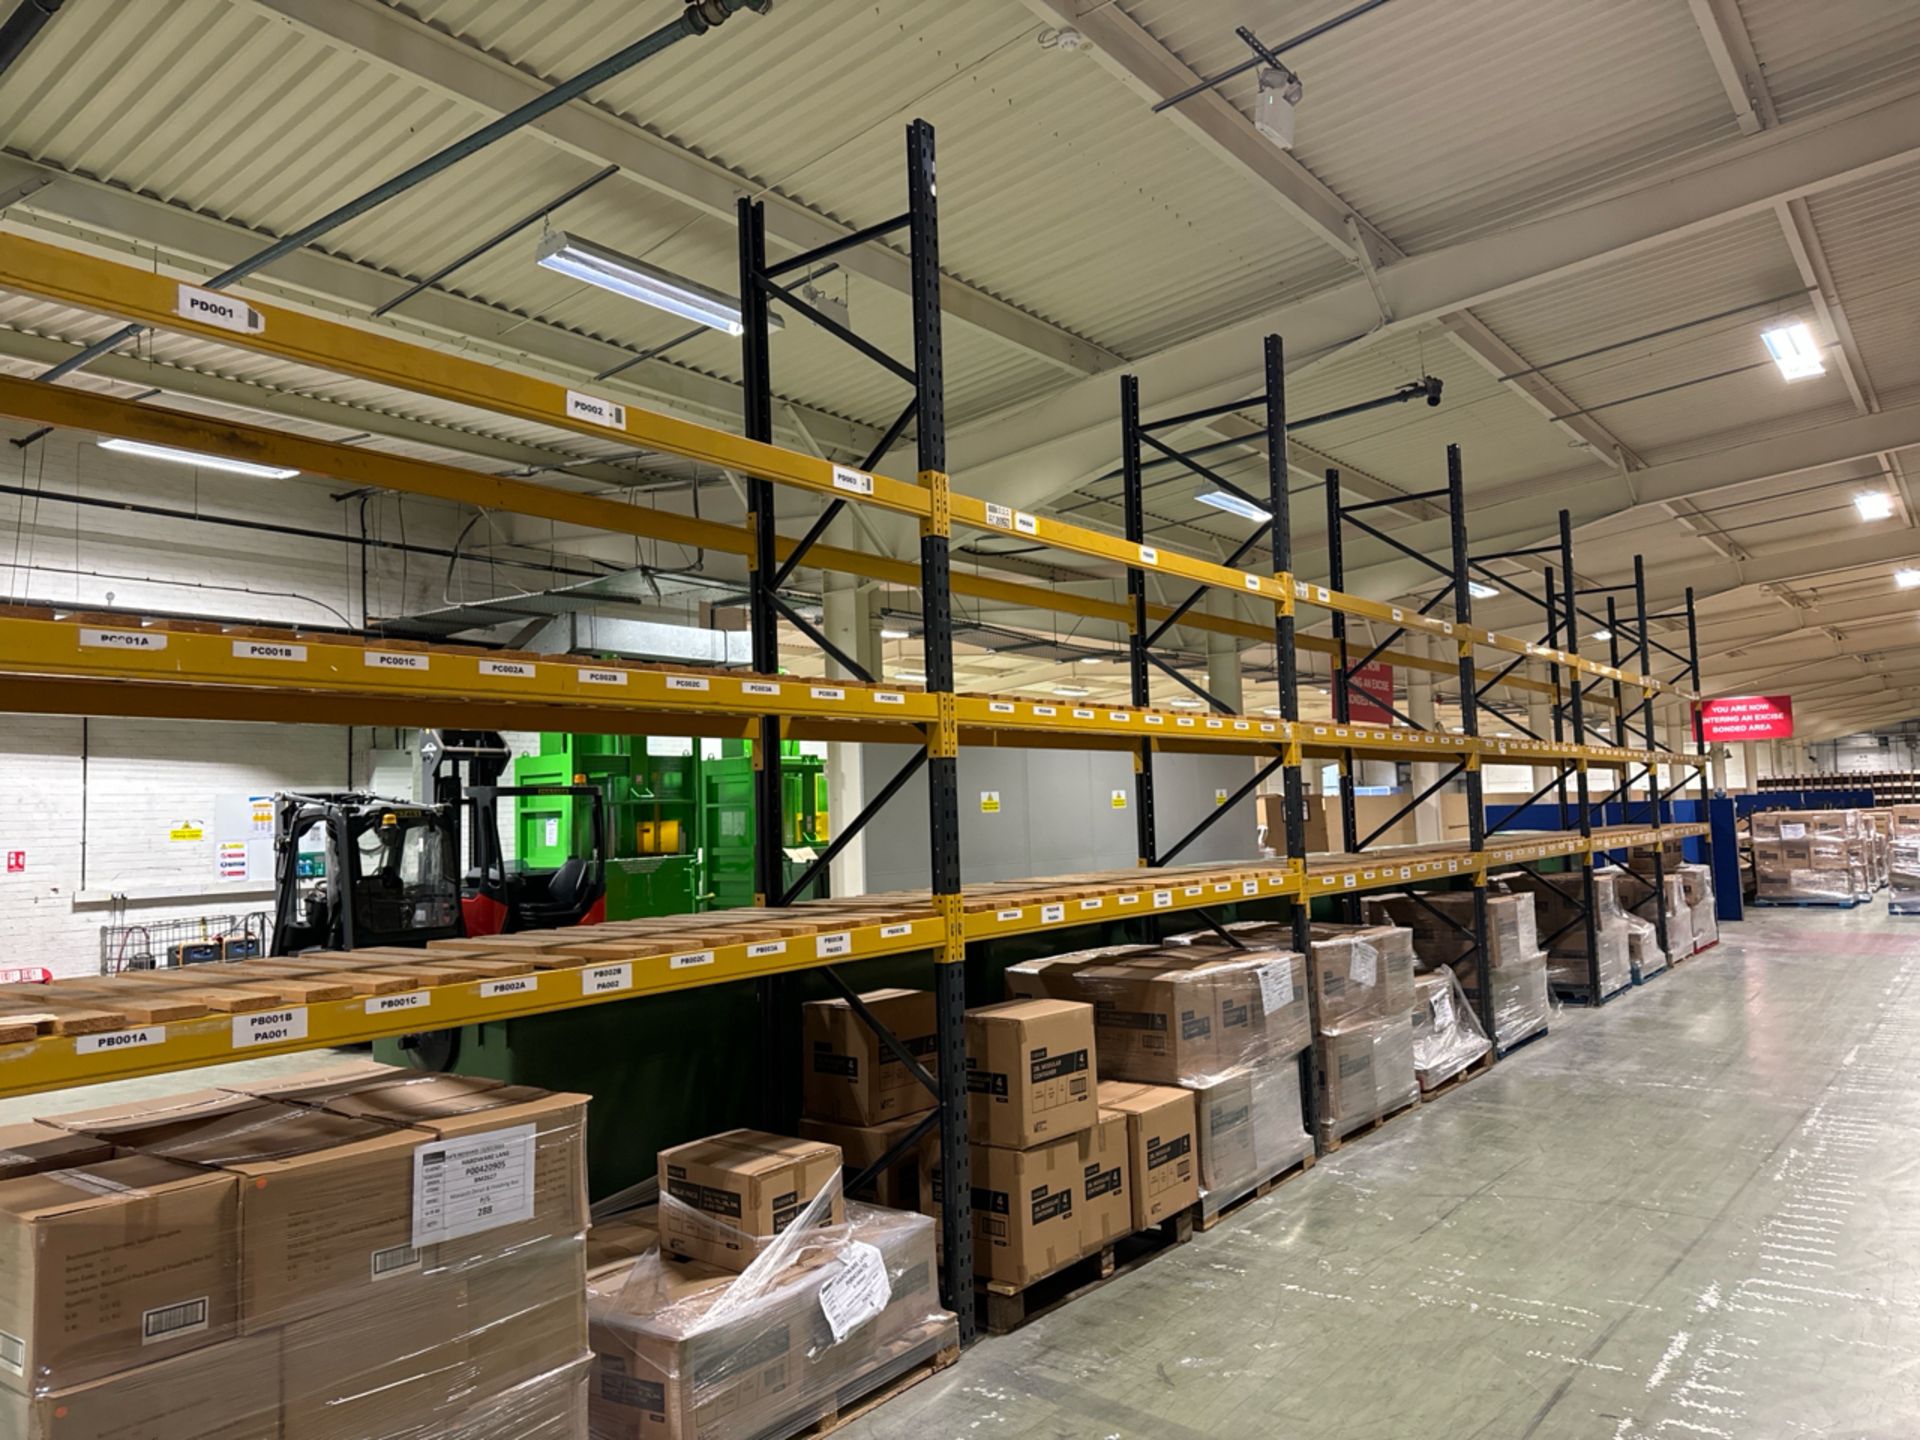 6 Bays Of Boltless Industrial Pallet Racking - Image 2 of 8